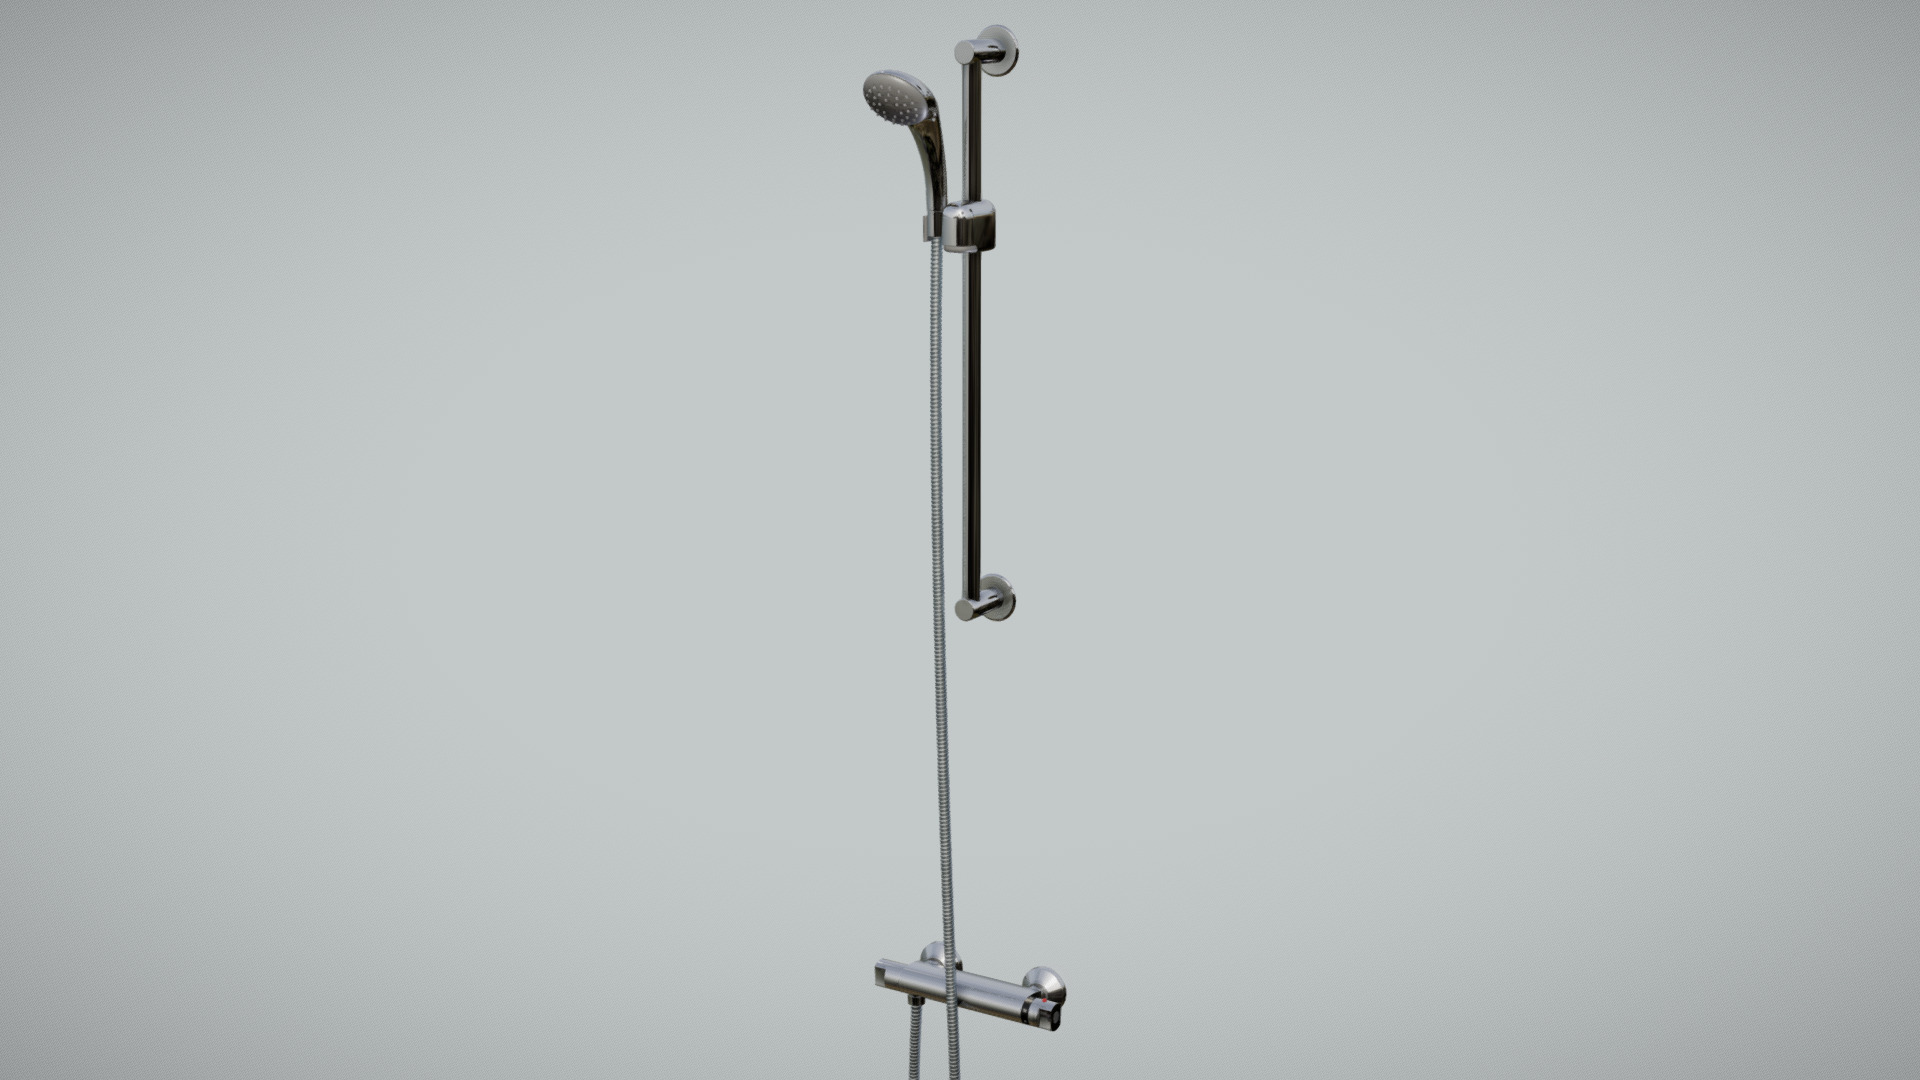 3D model Thermostatic Shower Mixer - This is a 3D model of the Thermostatic Shower Mixer. The 3D model is about a light pole with a camera on it.